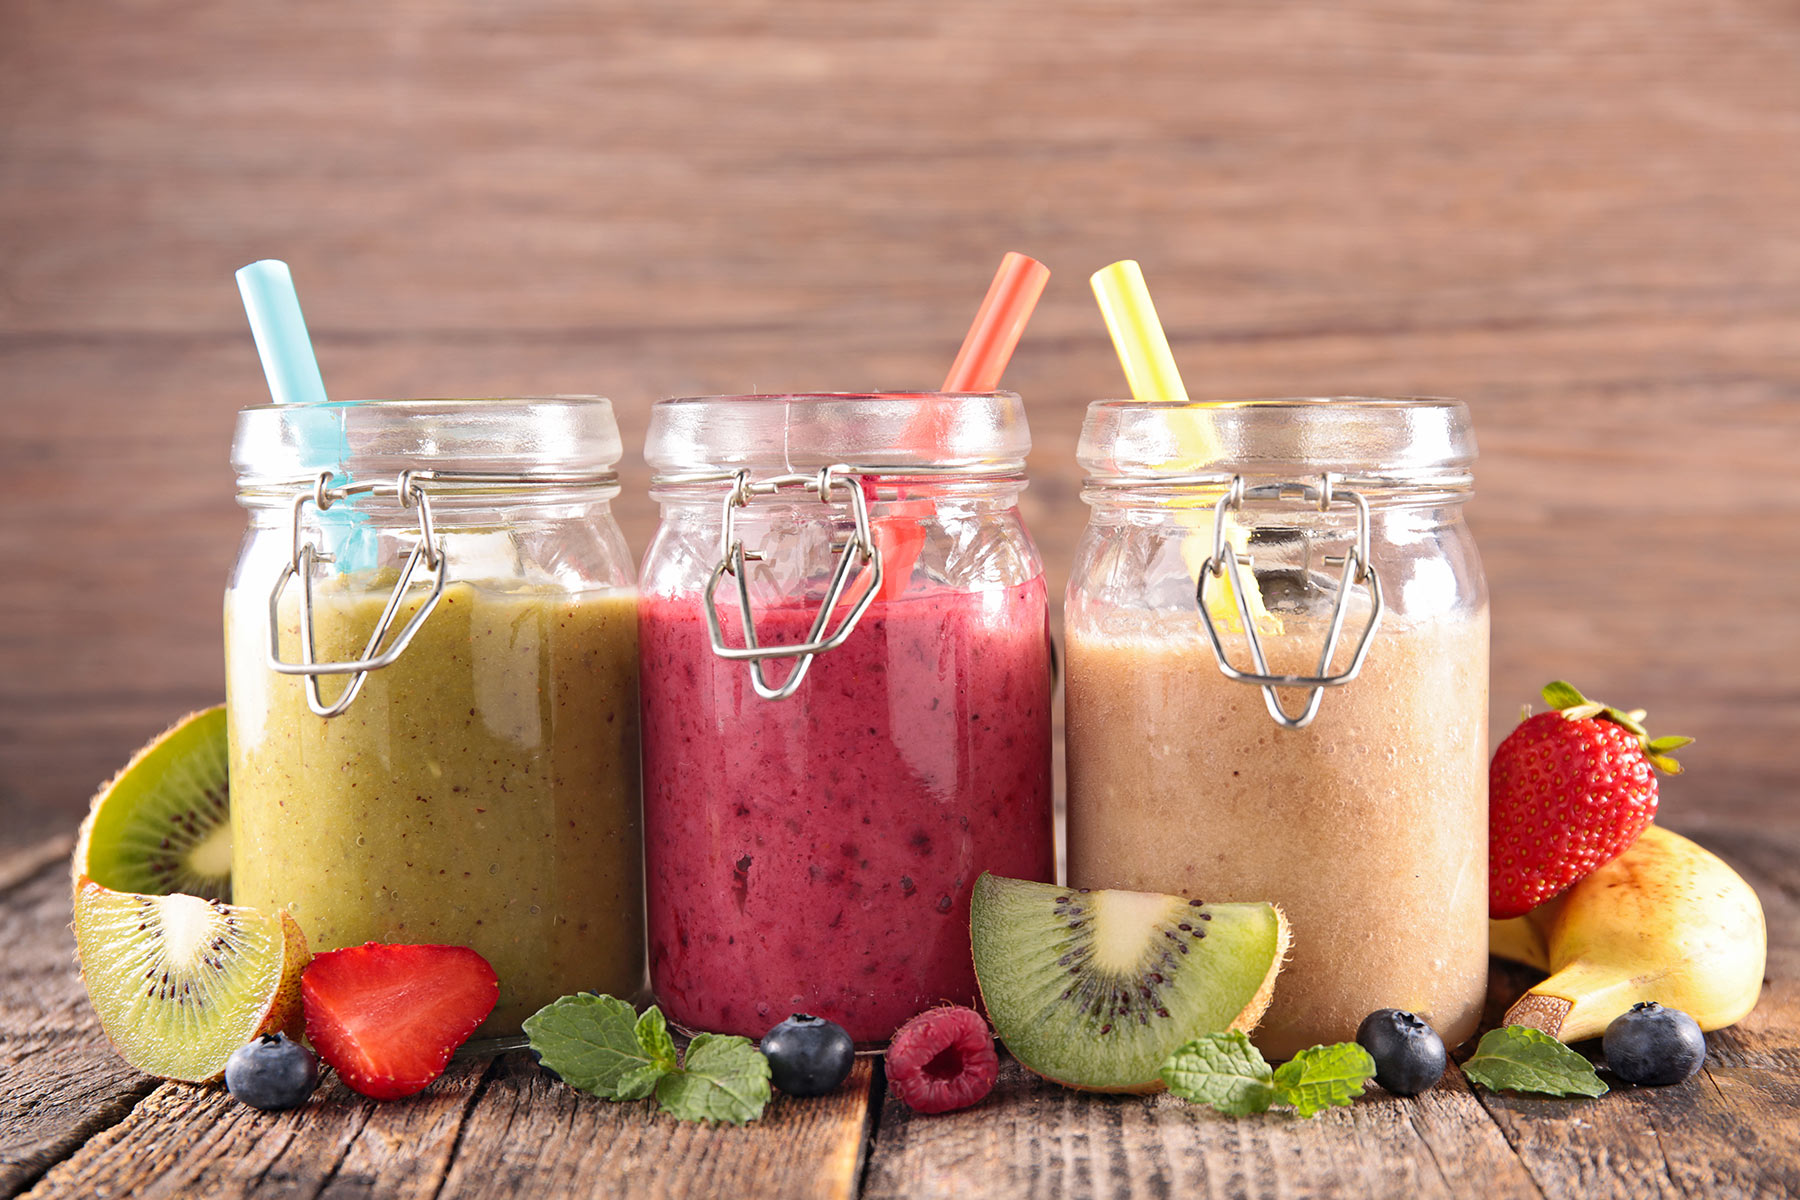 slices of kiwi and strawberry, blueberries and mint, near three jars with snap lids, containing blended drinks in different colors, healthy smoothie recipes, straws and a banana